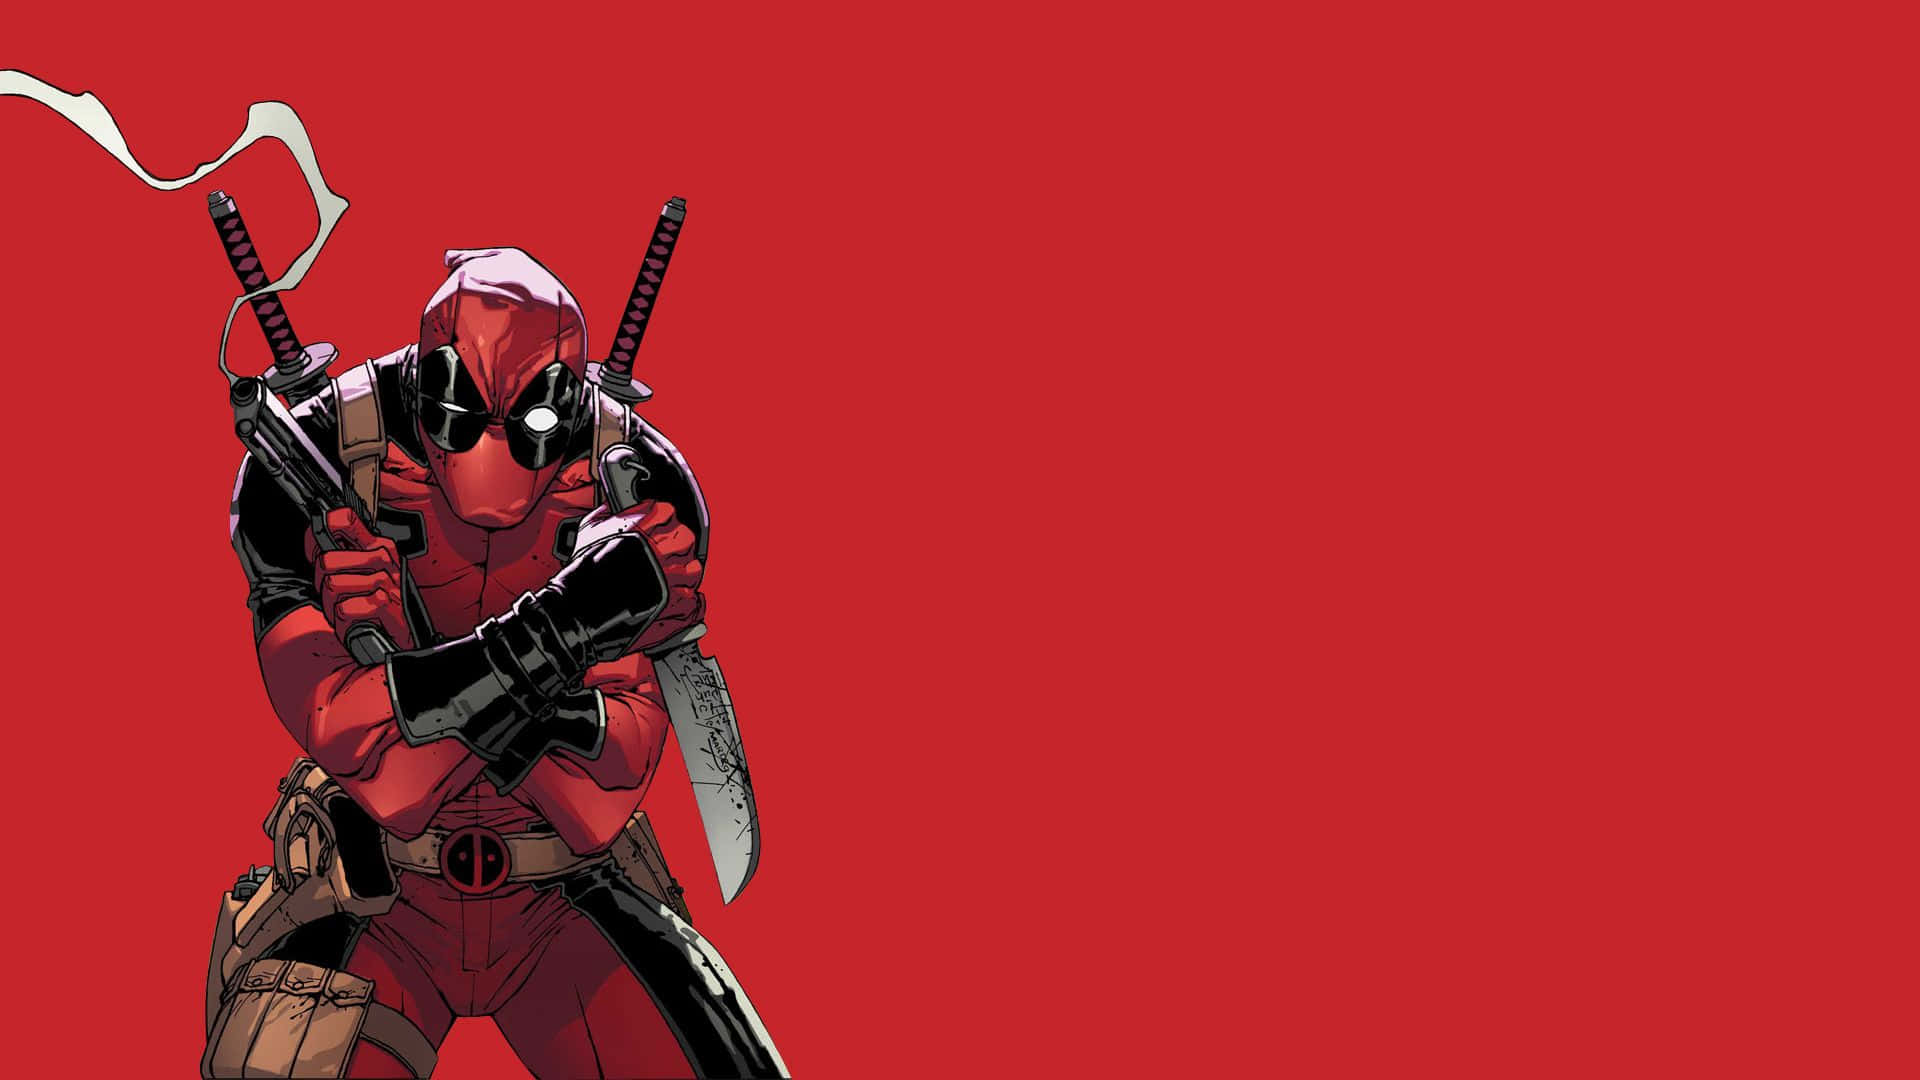 "I'm funny and I know it!" - Deadpool Wallpaper